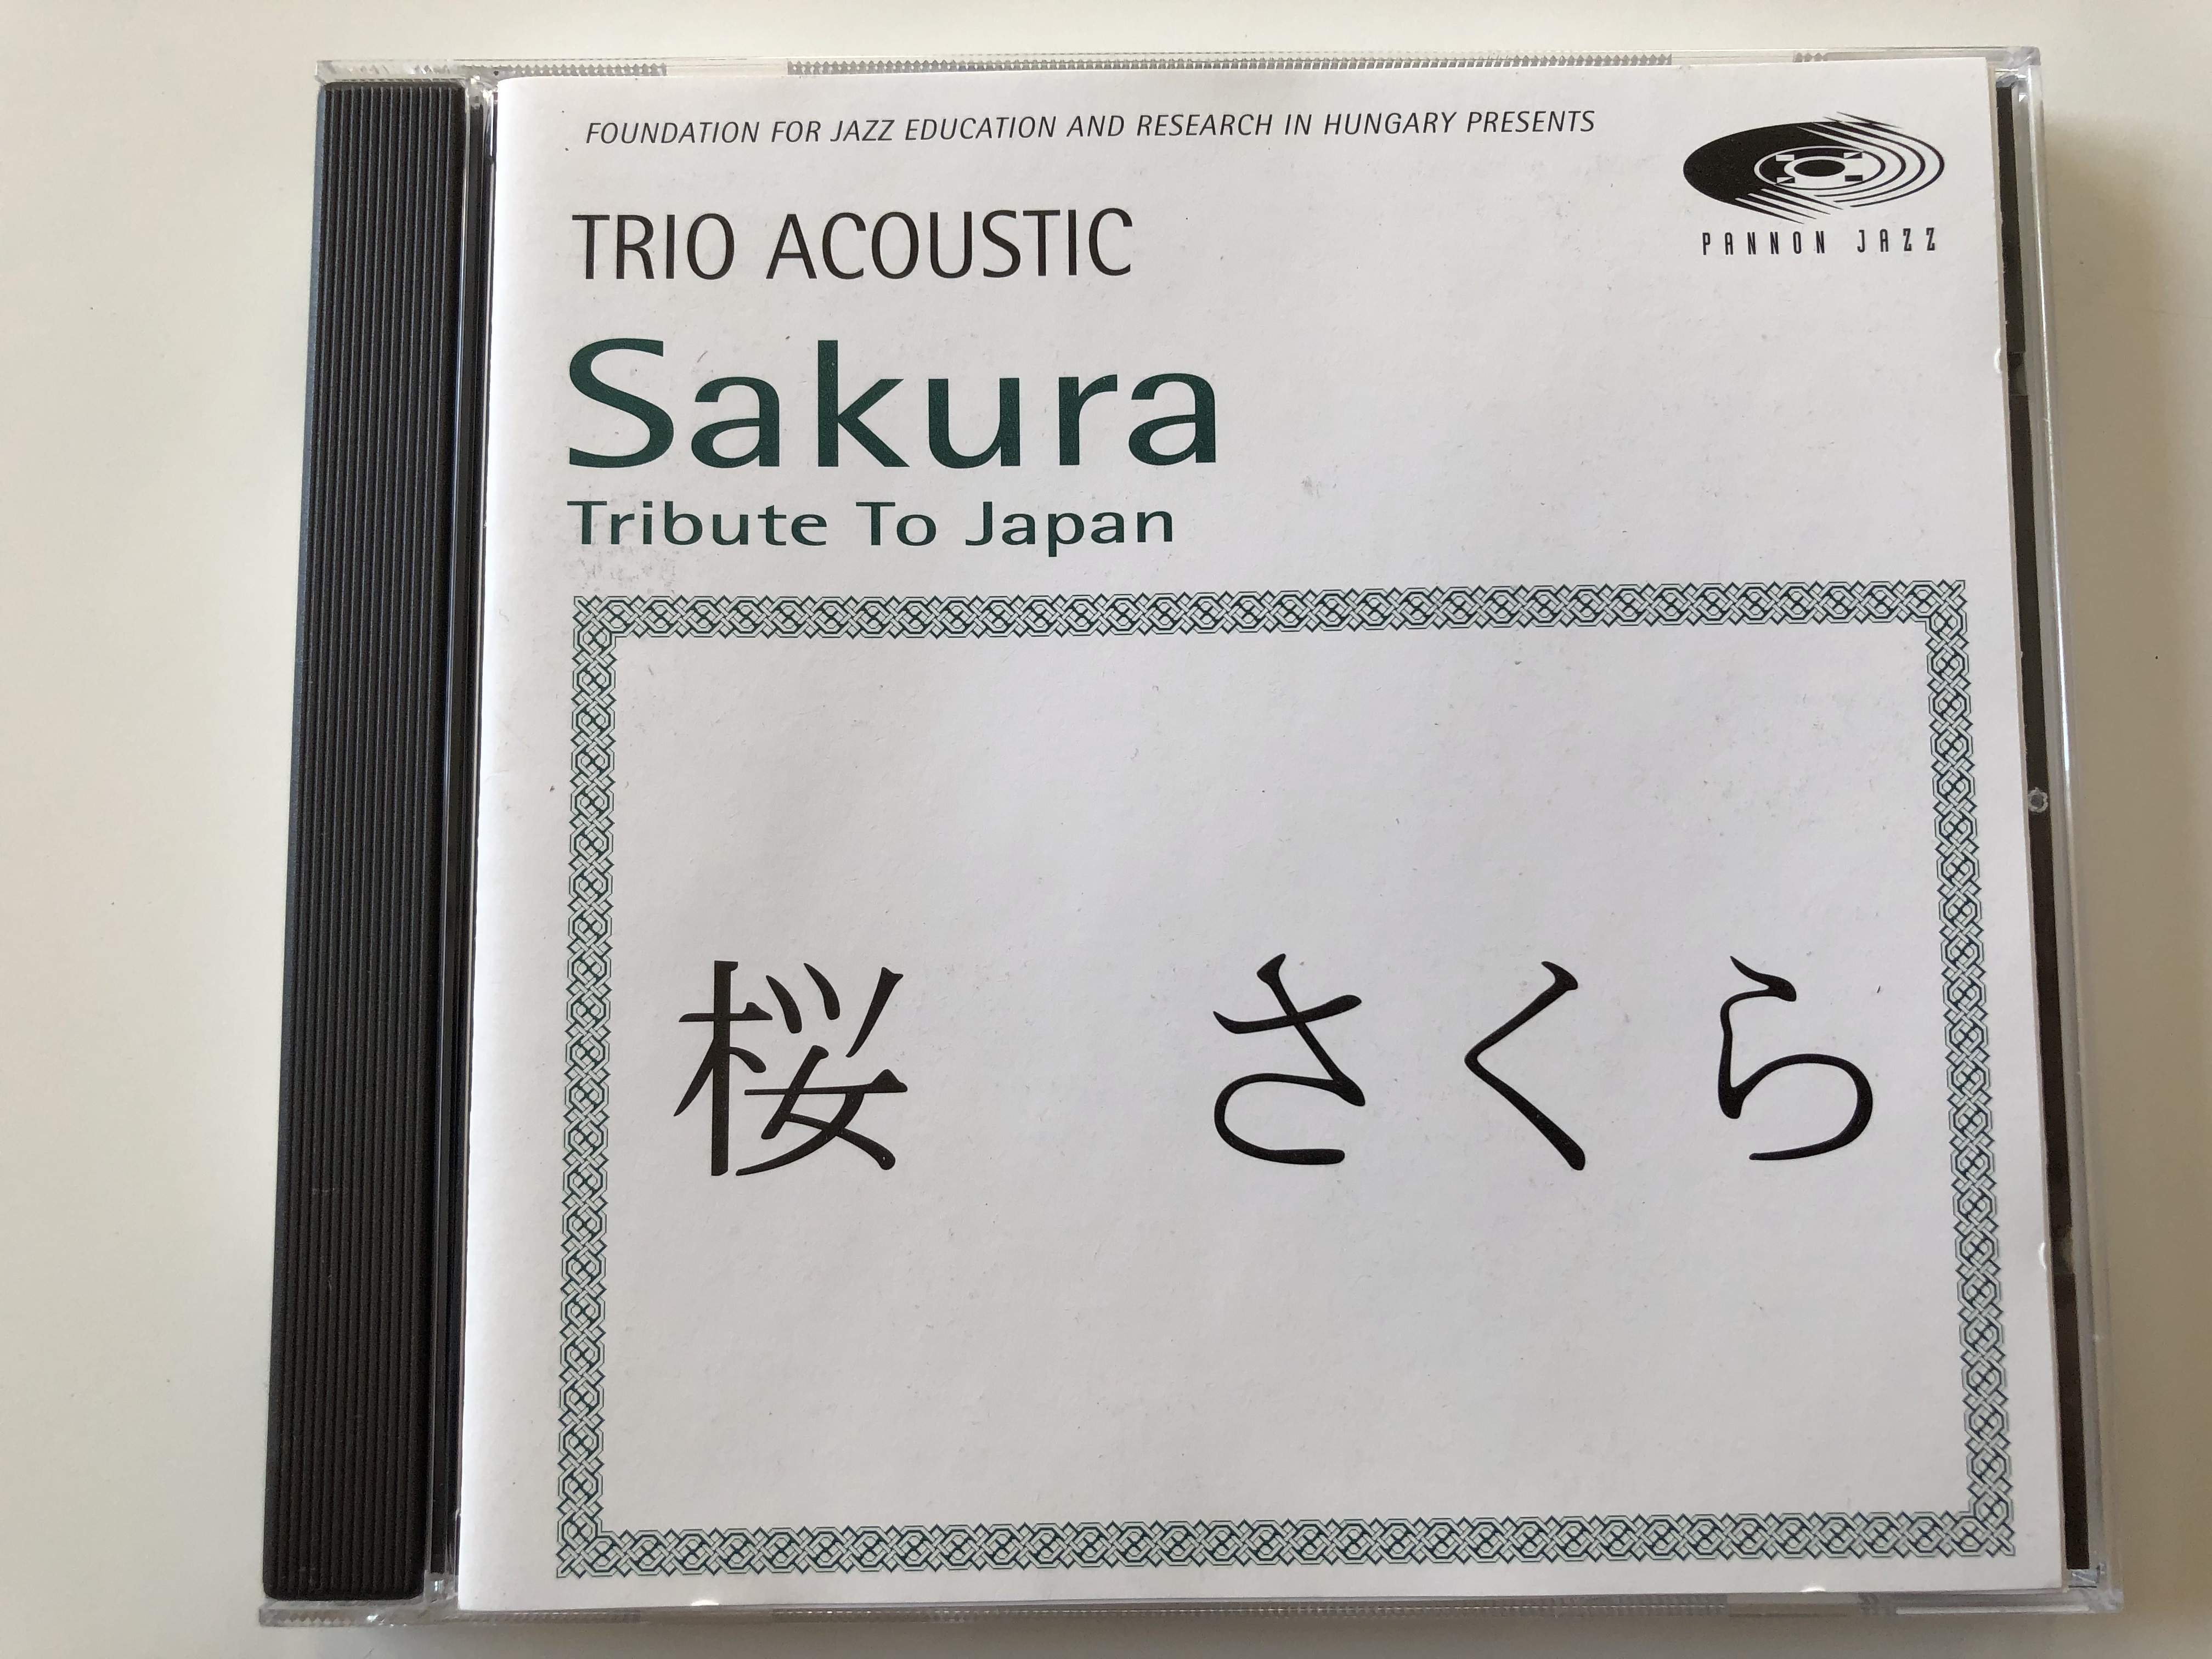 foundation-for-jazz-education-and-research-in-hungary-presents-trio-acoustic-sakura-tribute-to-japan-pannon-jazz-audio-cd-1997-pj-1033-1-.jpg